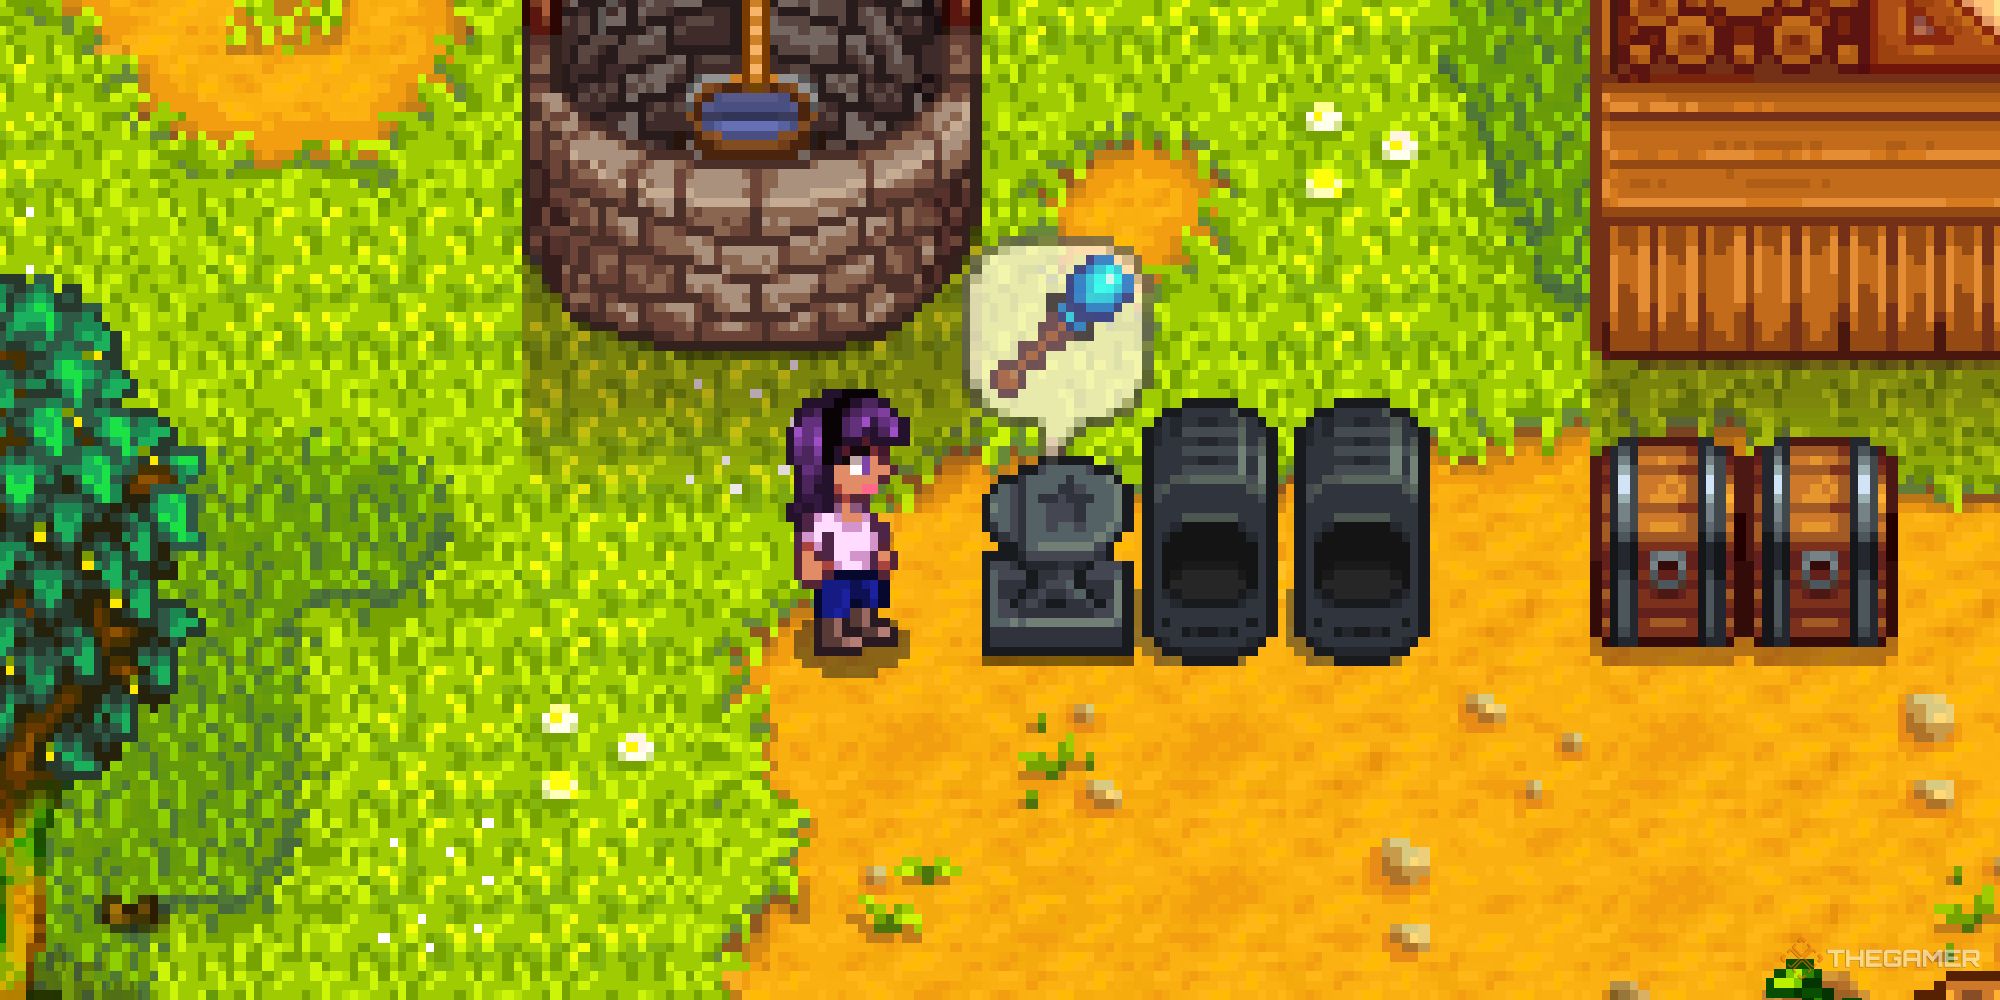 Standing next to Anvil after it has re-rolled a trinket's stats in Stardew Valley.